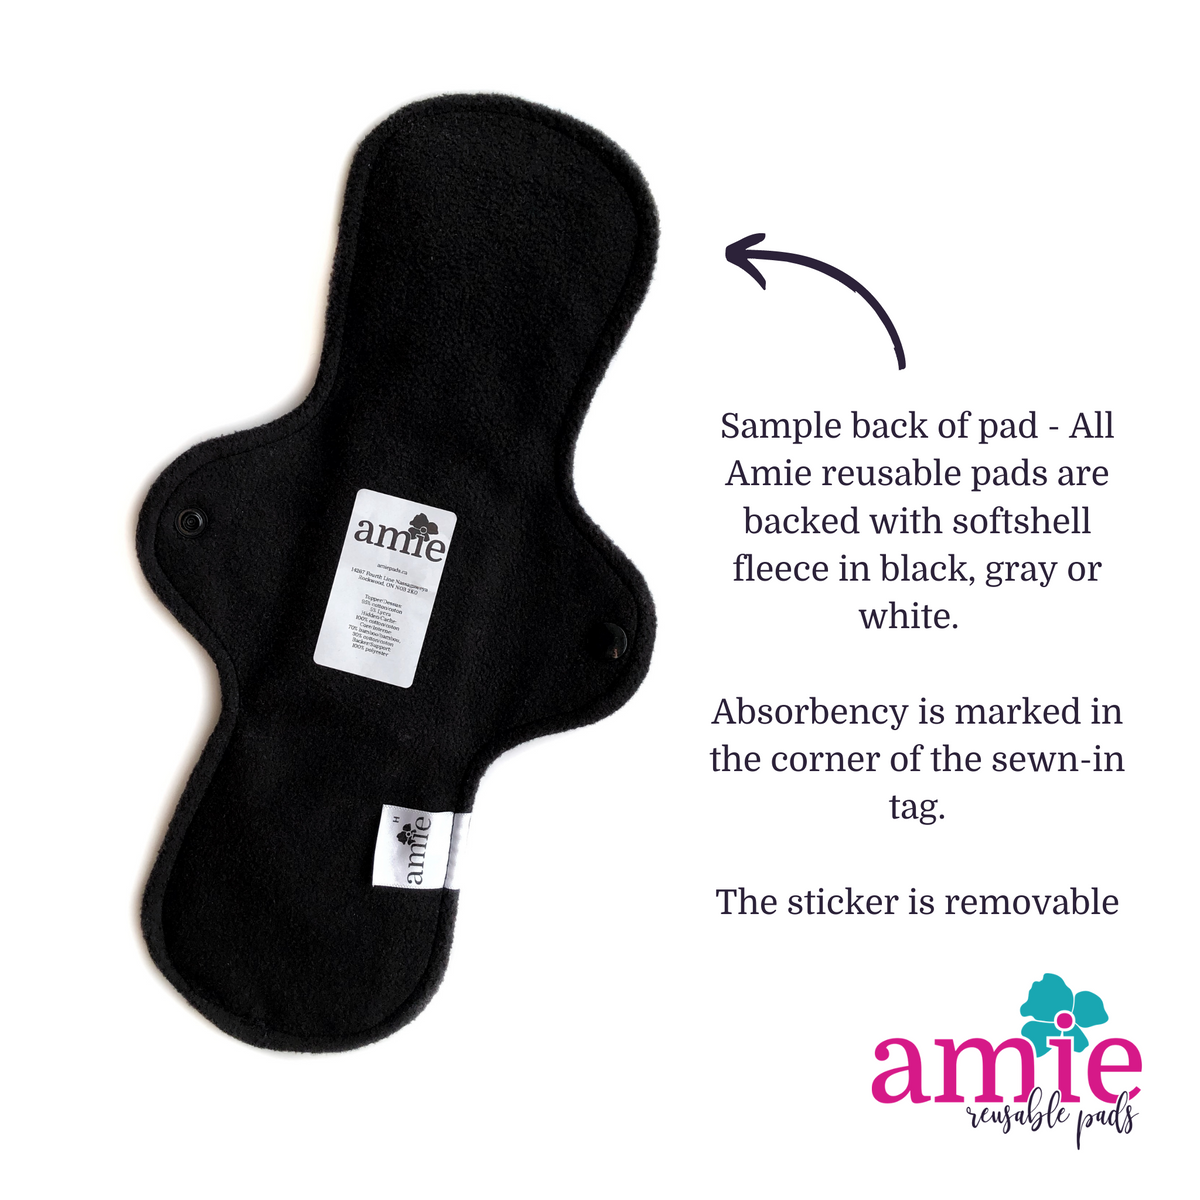 sample back of our reusable pad showing removable sticker and softshell fabric